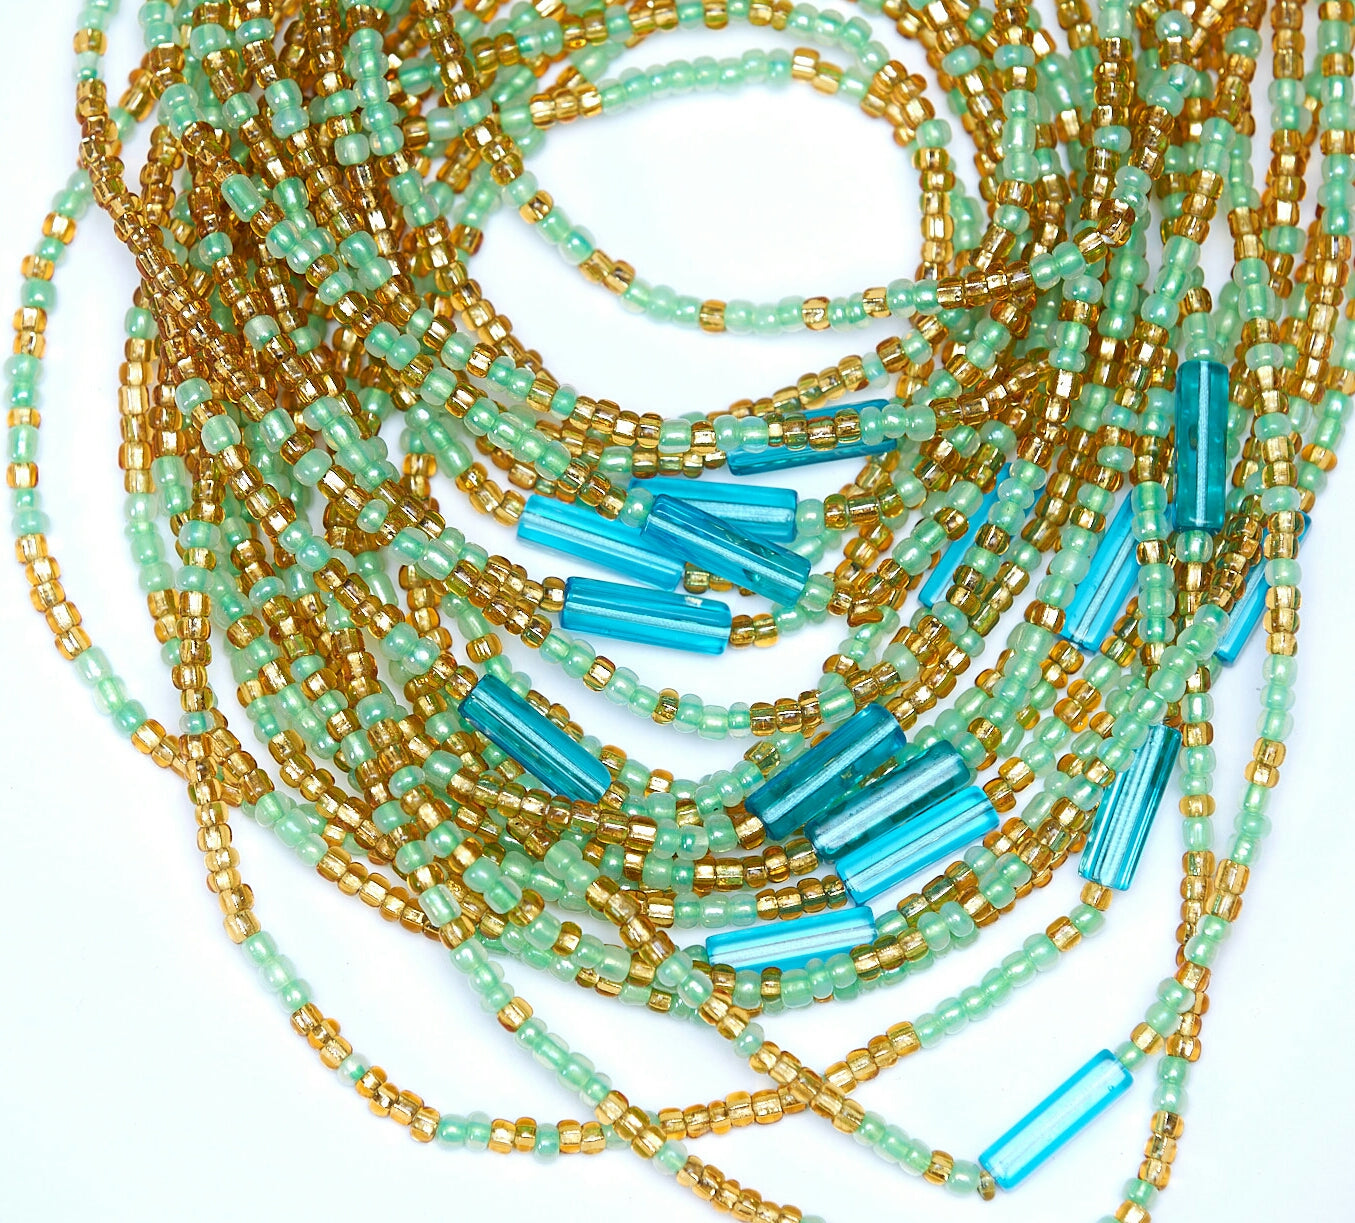 45 Inches Lemon Green And Gold Beads With Blue Pebble Bars Tie on Waist Beads